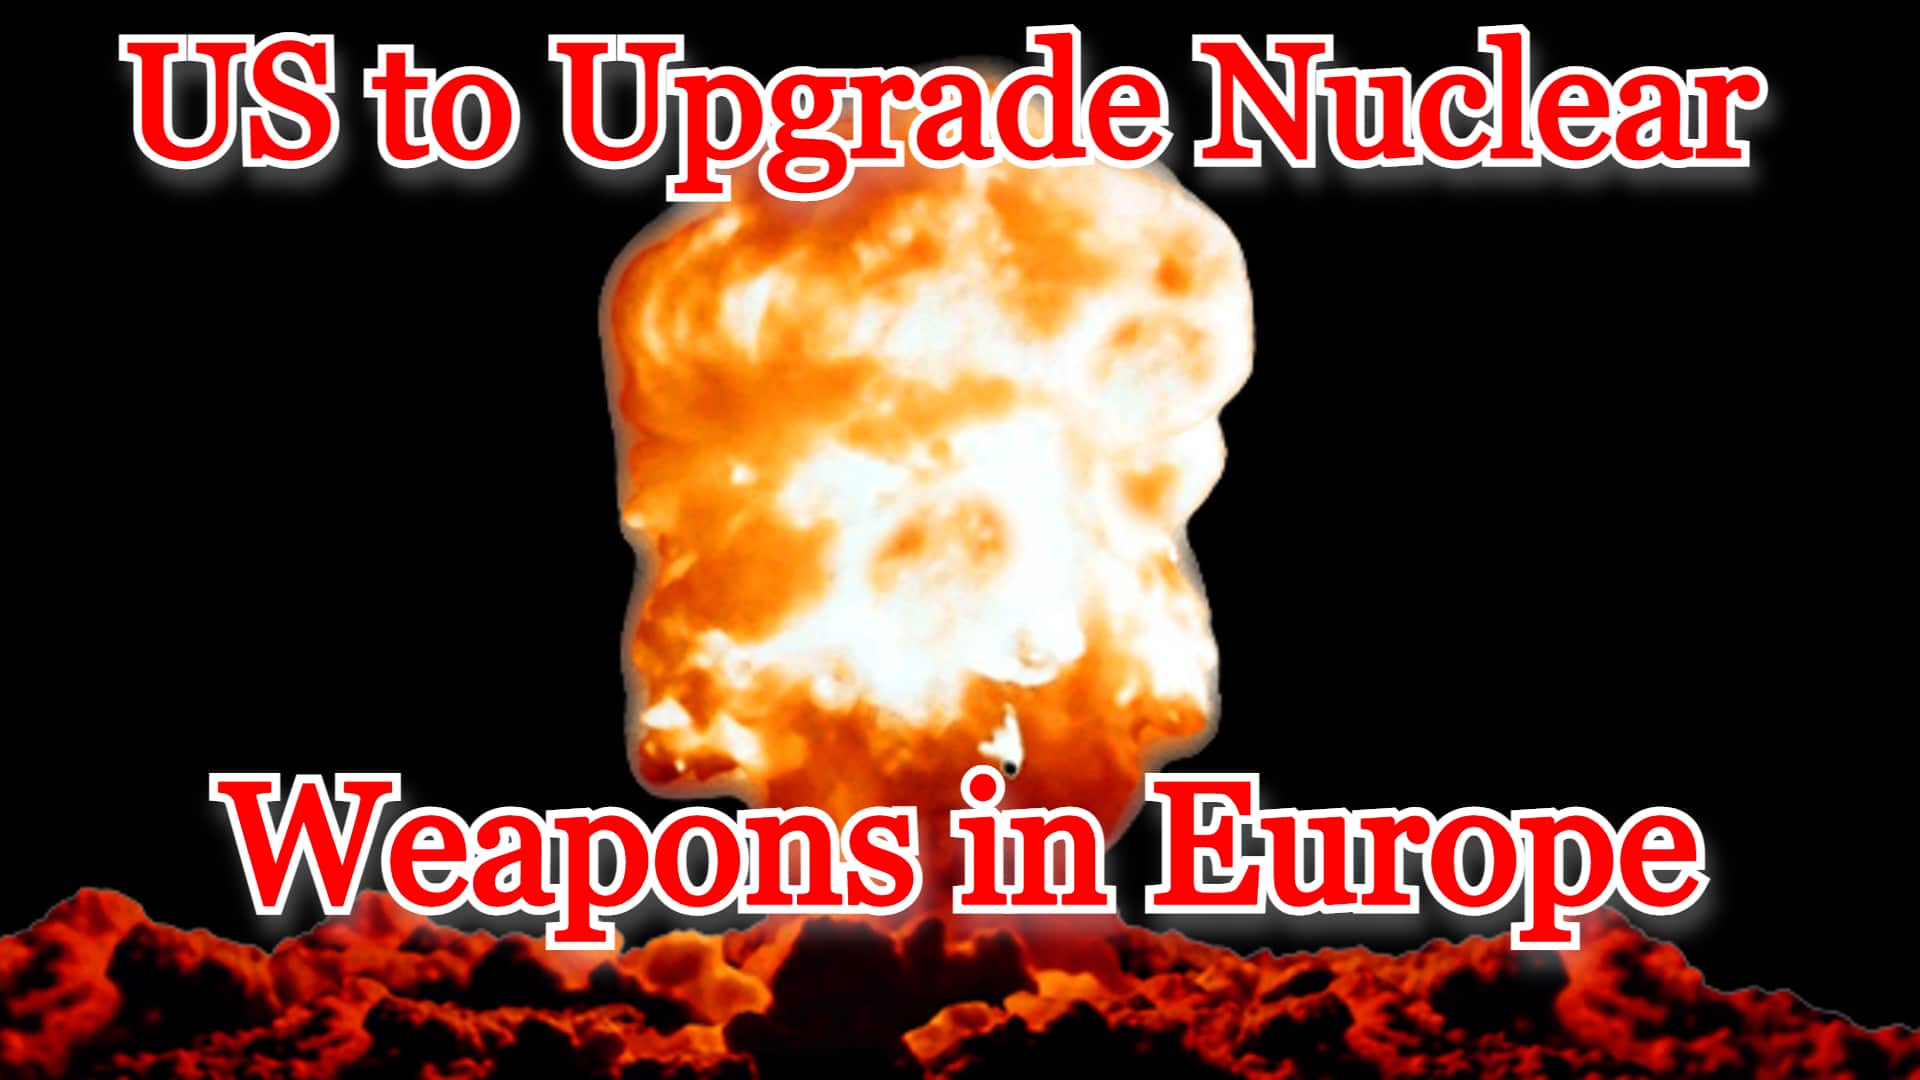 COI #342: US to Upgrade Nuclear Weapons in Europe